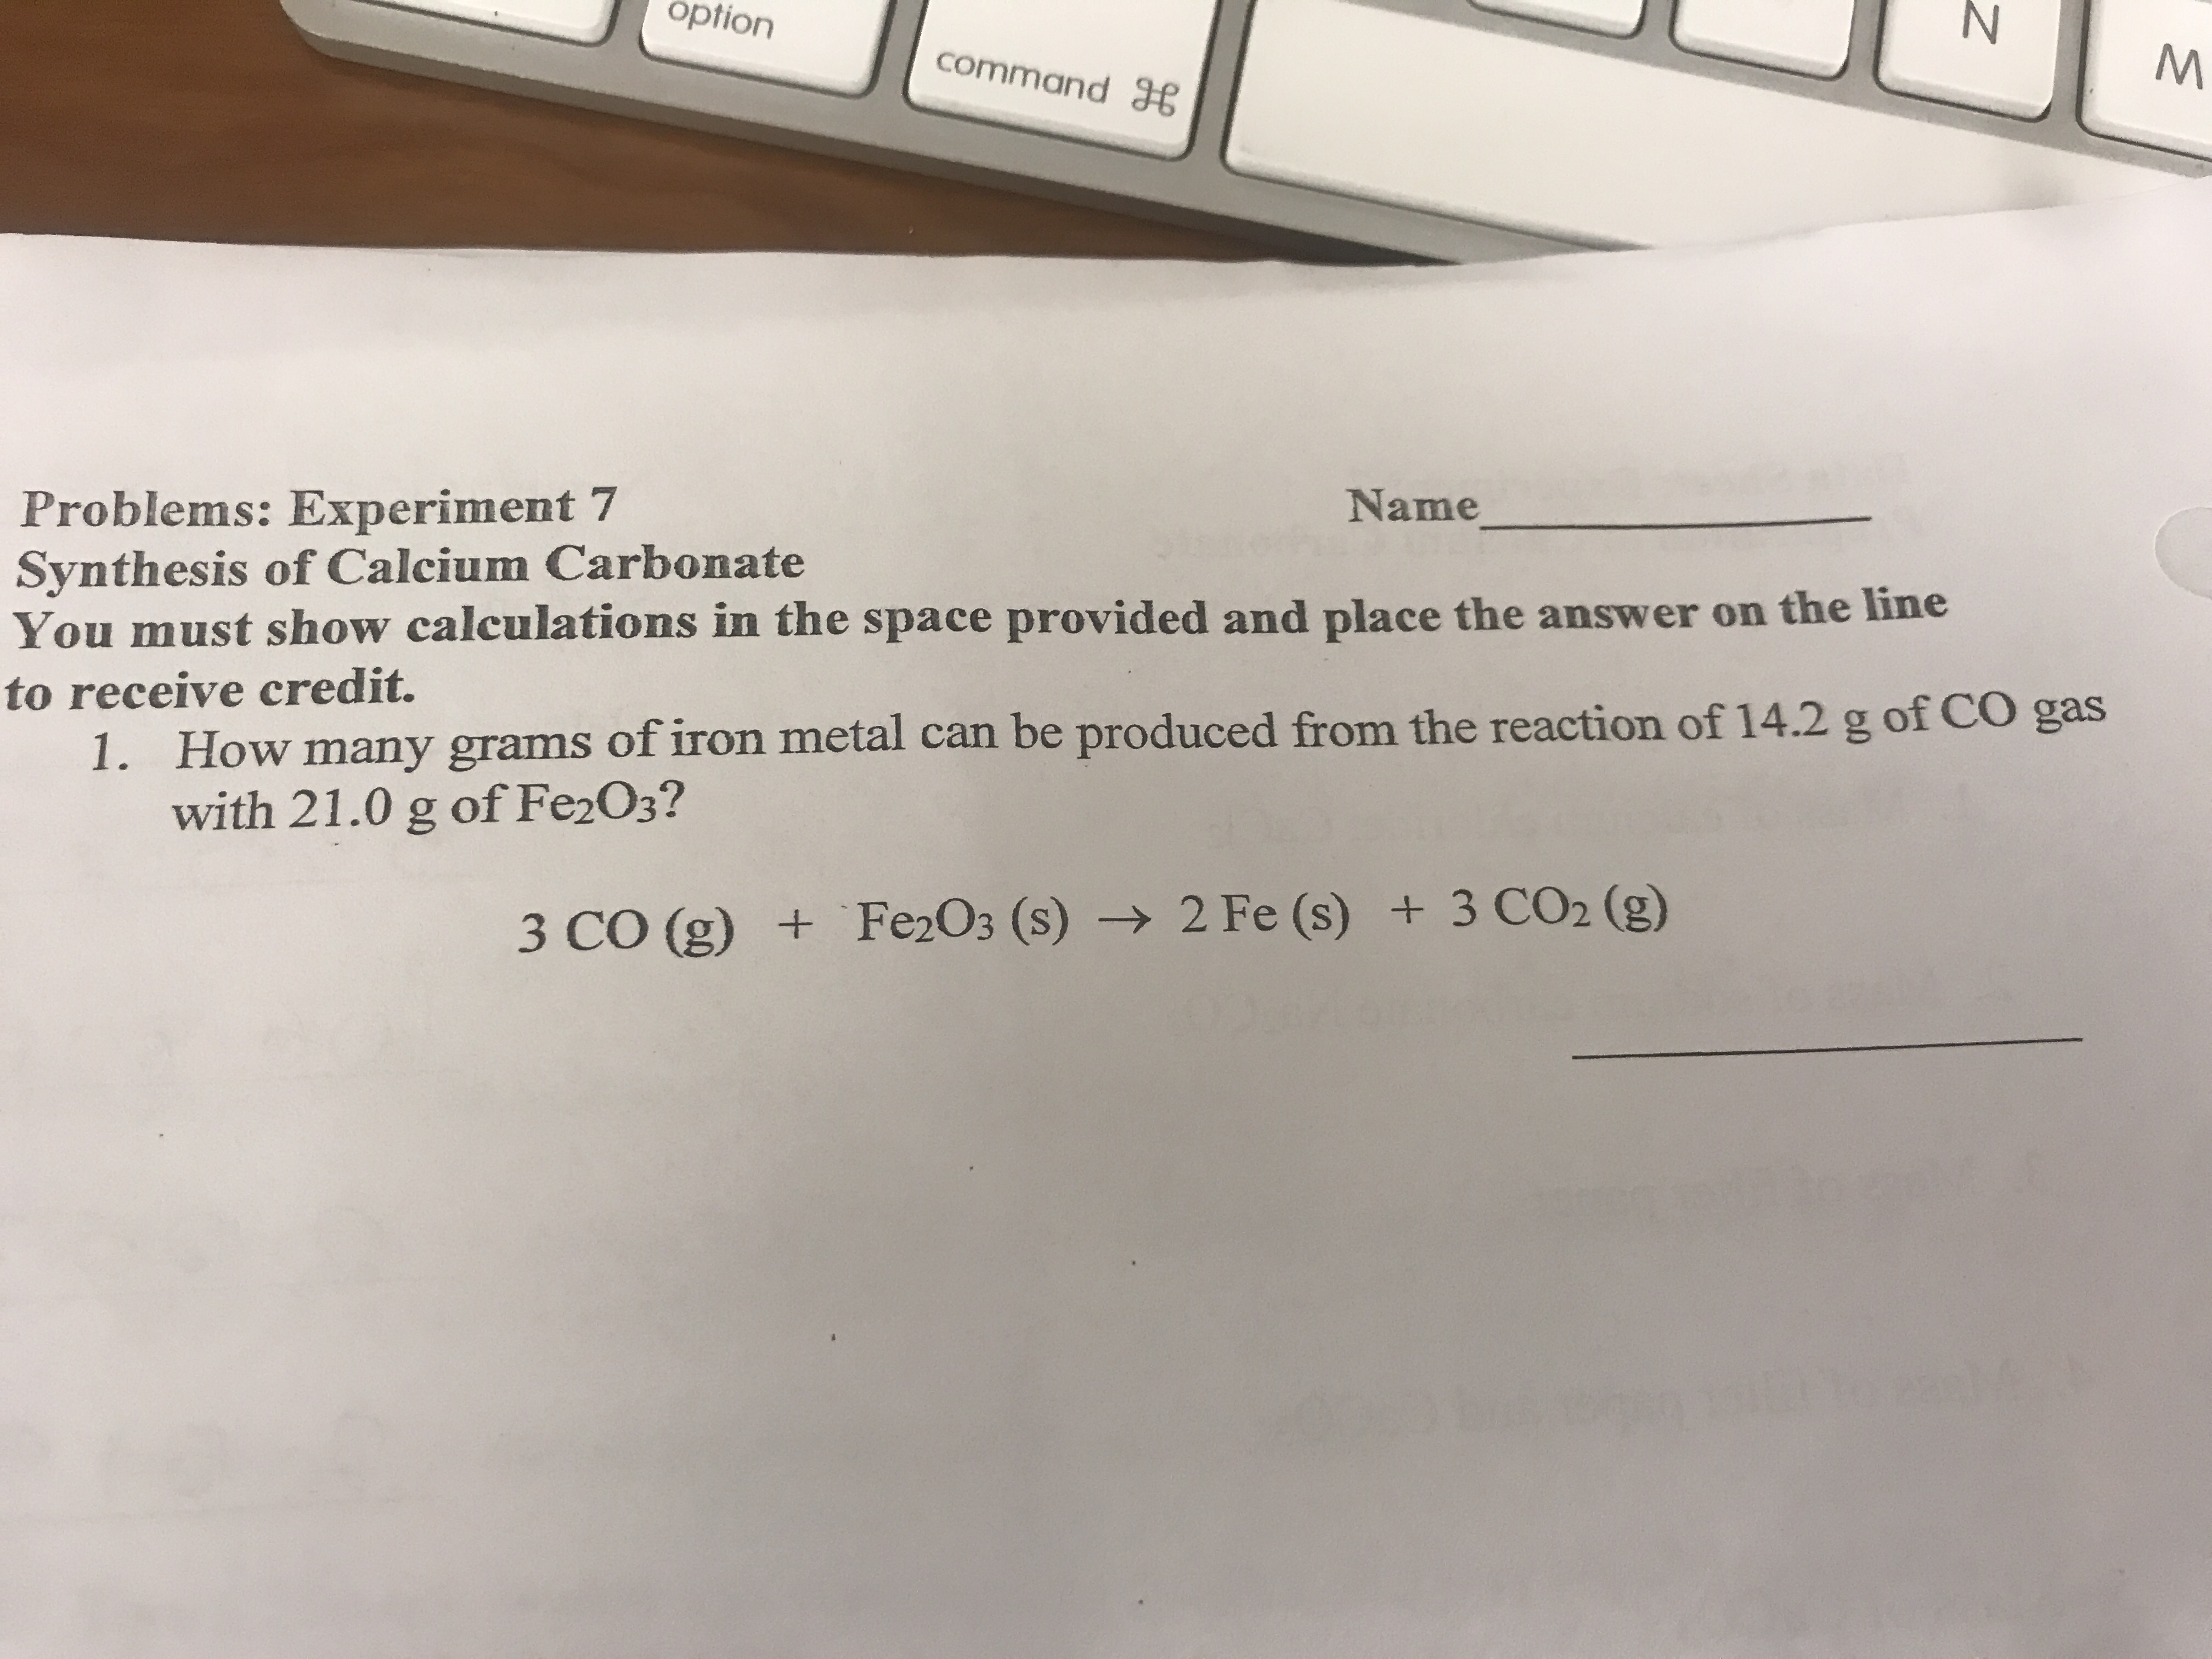 option
command B
Name
Problems: Experiment 7
Synthesis of Calcium Carbonate
You must show calculations in the space provided and place the answer on the line
How many grams of iron metal can be produced from the reaction of 14.2 g of CO gas
with 21.0 g of Fe2 O3?
to receive credit.
1.
3 CO (g) Fe2O3 (s) -2 Fe (s) + 3 CO2 (g)
